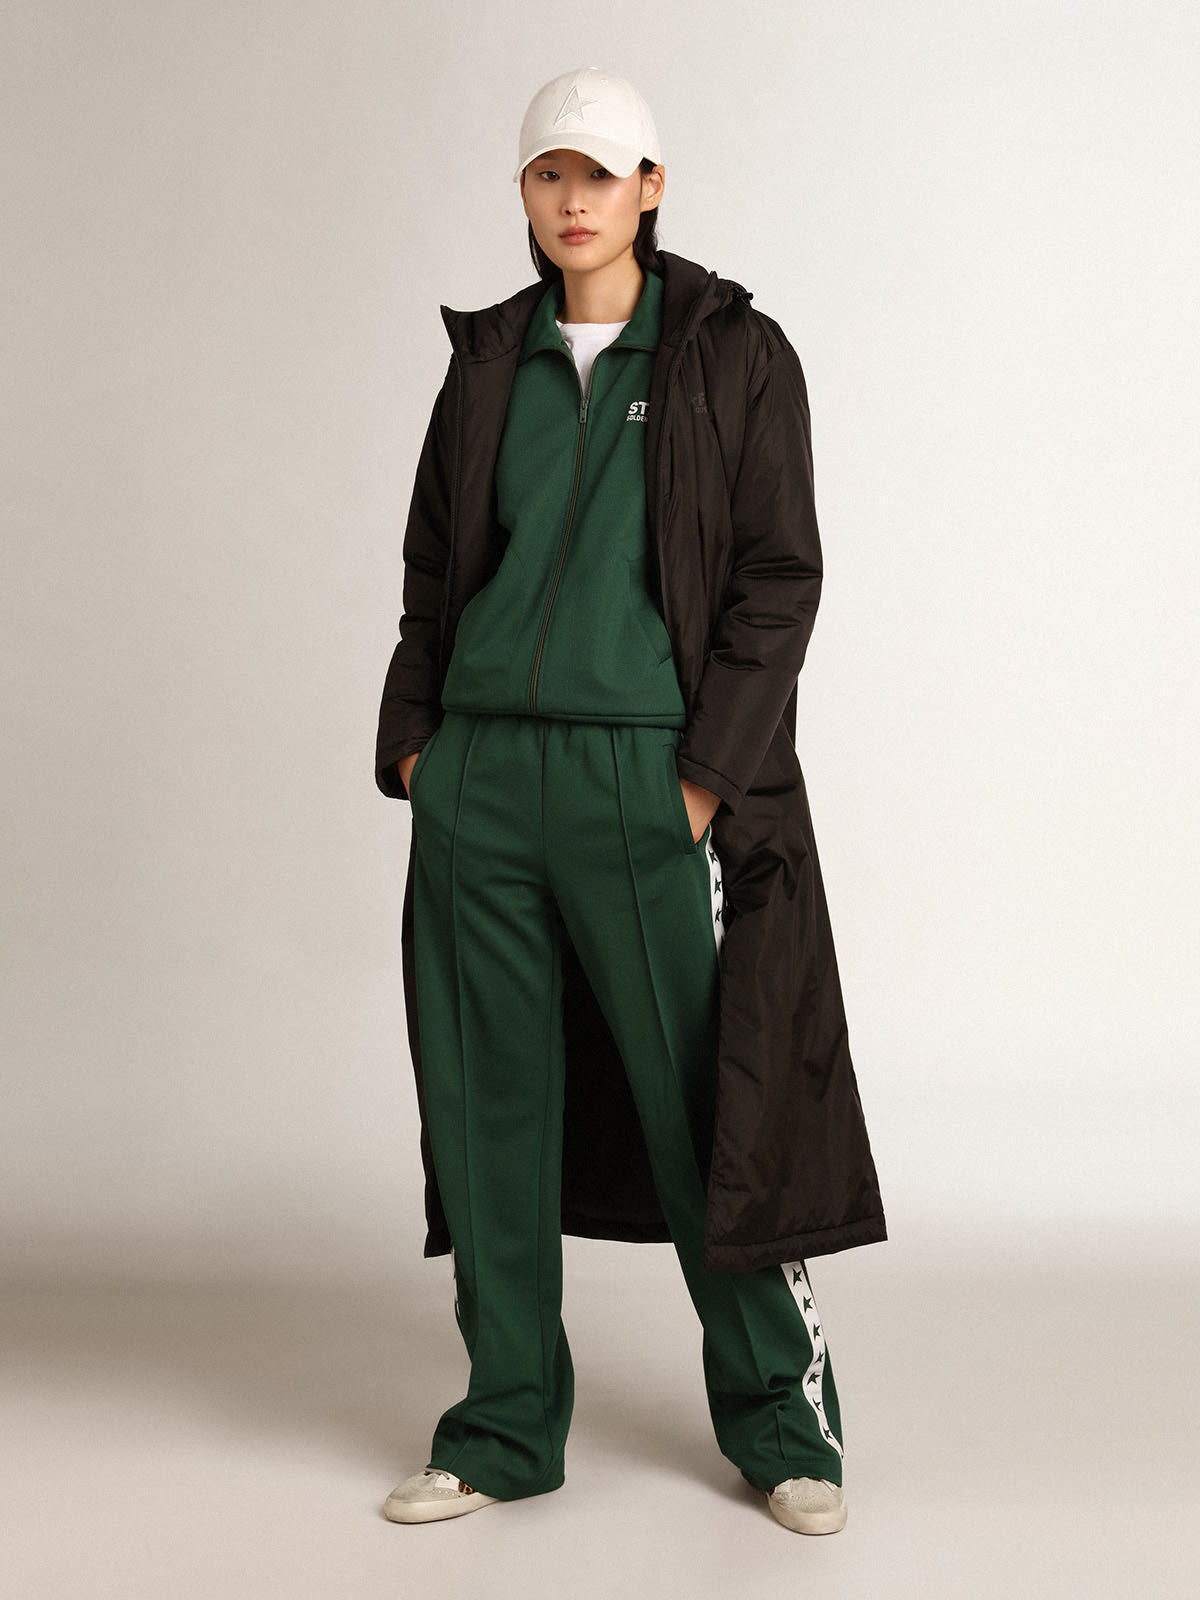 Golden Goose - Women’s green zipped sweatshirt with white strip and contrasting stars in 